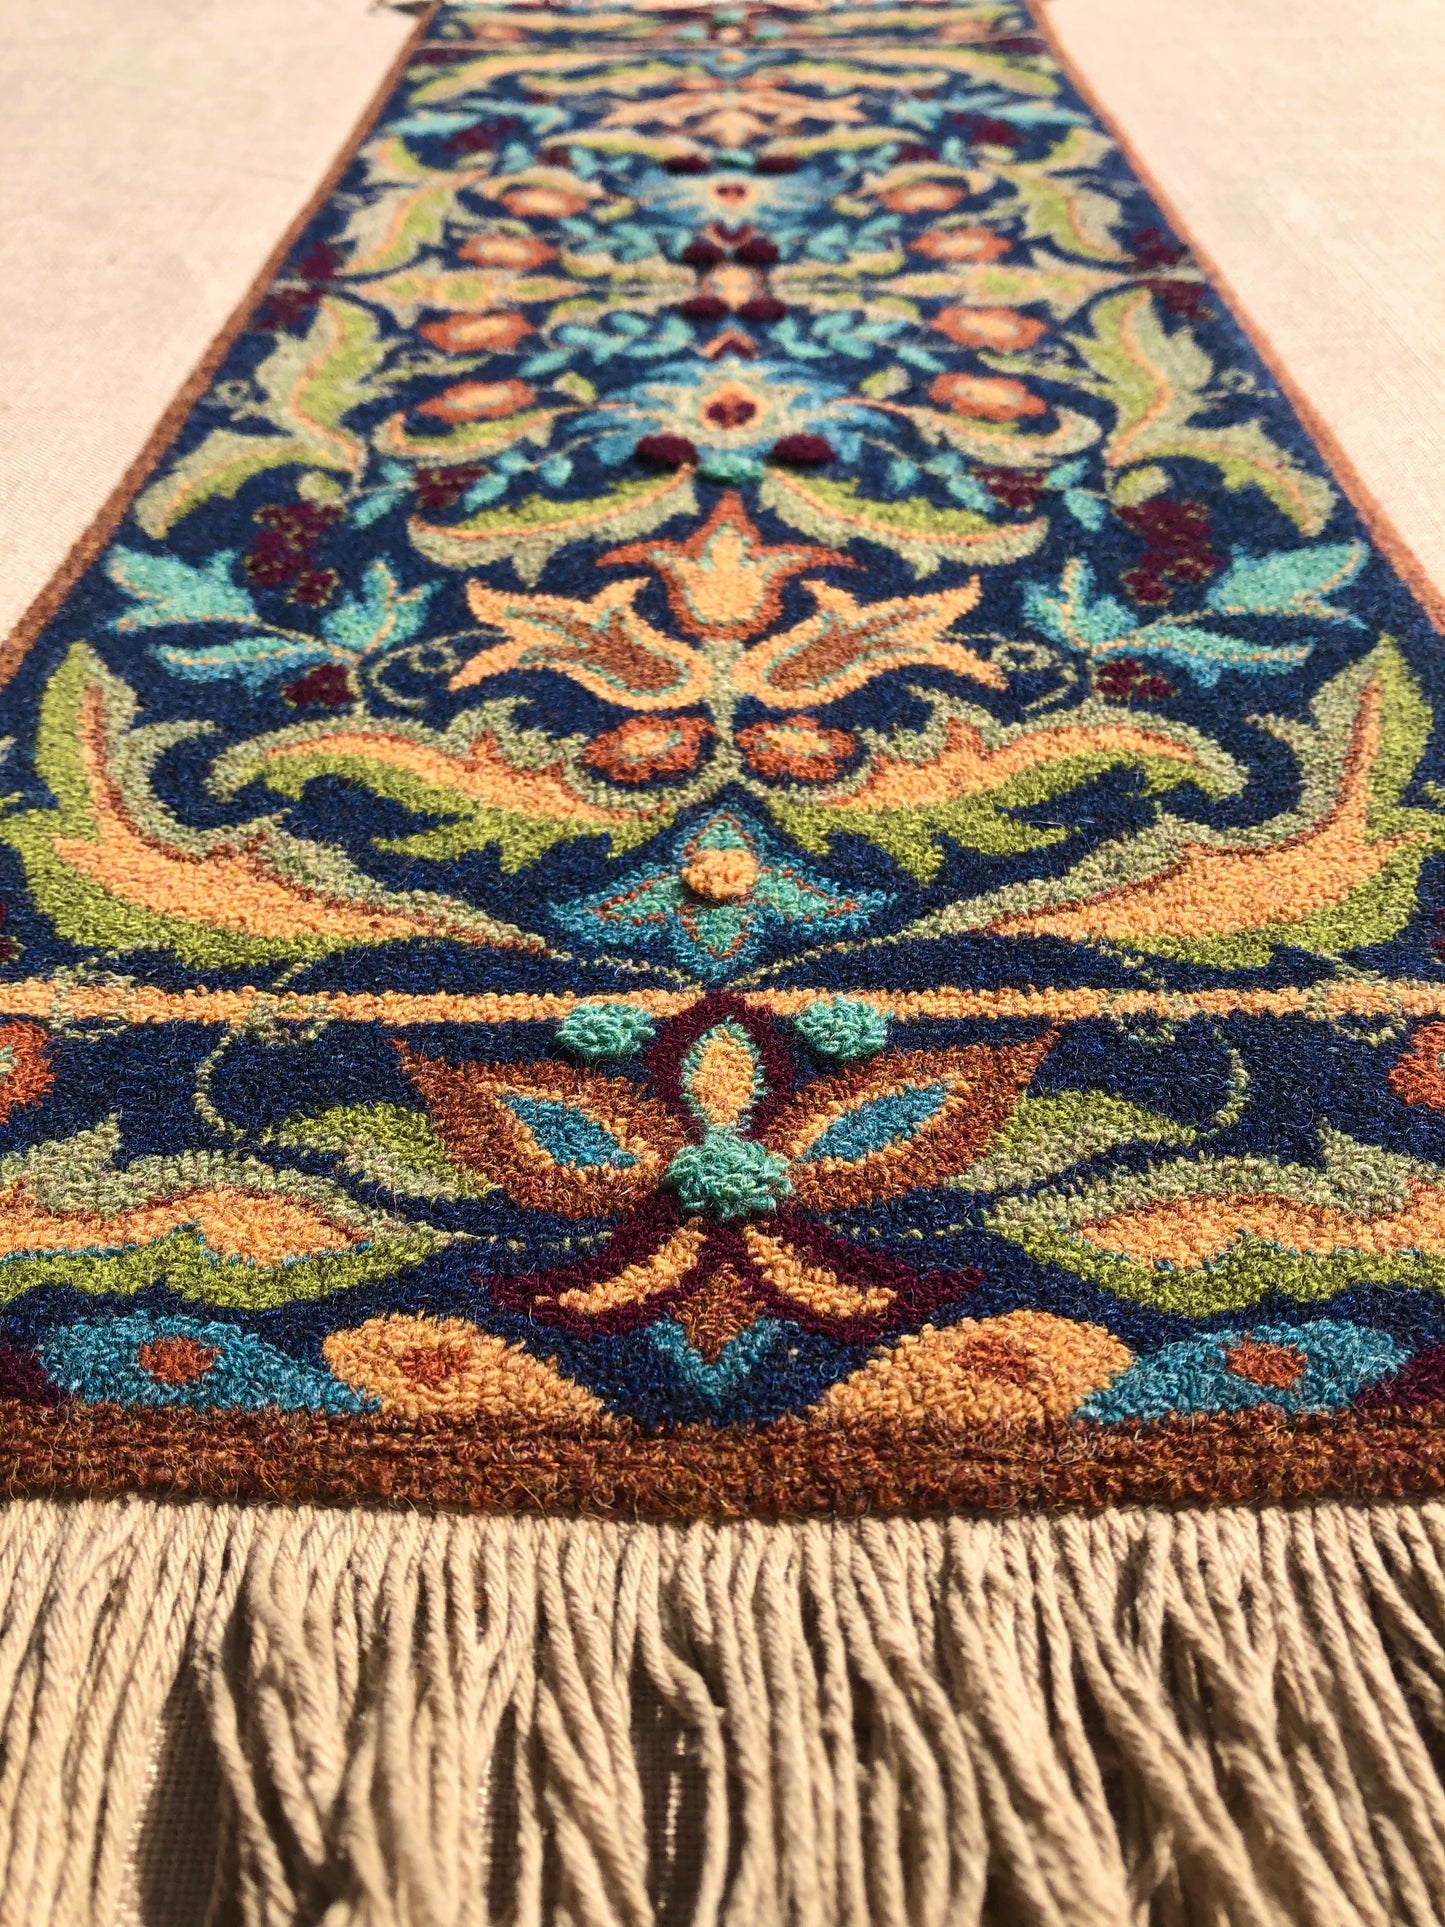 Tapestry Runner-Punch Needle Pattern by Orphaned Wool. This incredible runner pattern is available as a Paper Pattern and a Pattern on Weaver's Cloth. Both types of patterns include a full-color placement guide that will give you three options of threads to use , Rustic Moire Wool Threads, Valdani Threads, along with DMC Floss. Each type will bring a beautiful finish to this Tapestry Runner pattern. The photos of this design are showing the pattern finished in Rustic Moire Wool Threads.